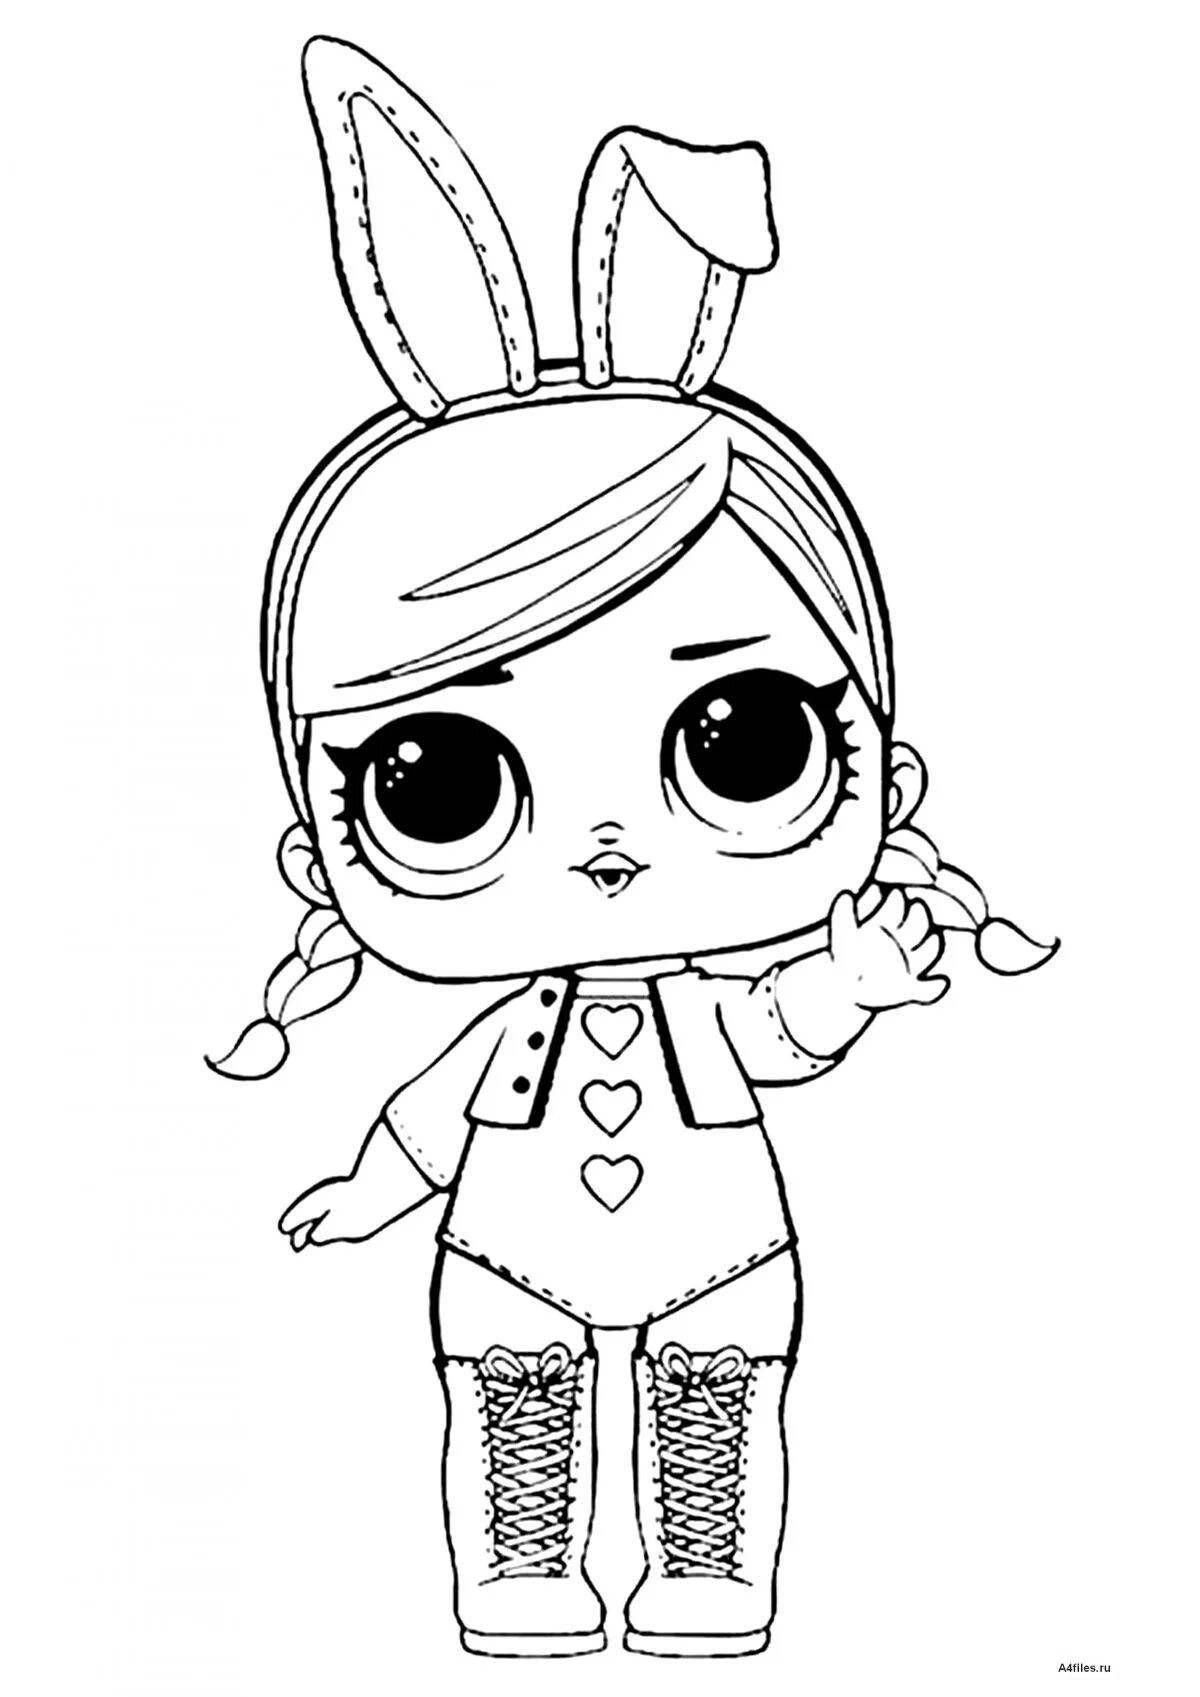 Gorgeous lola doll coloring book for kids